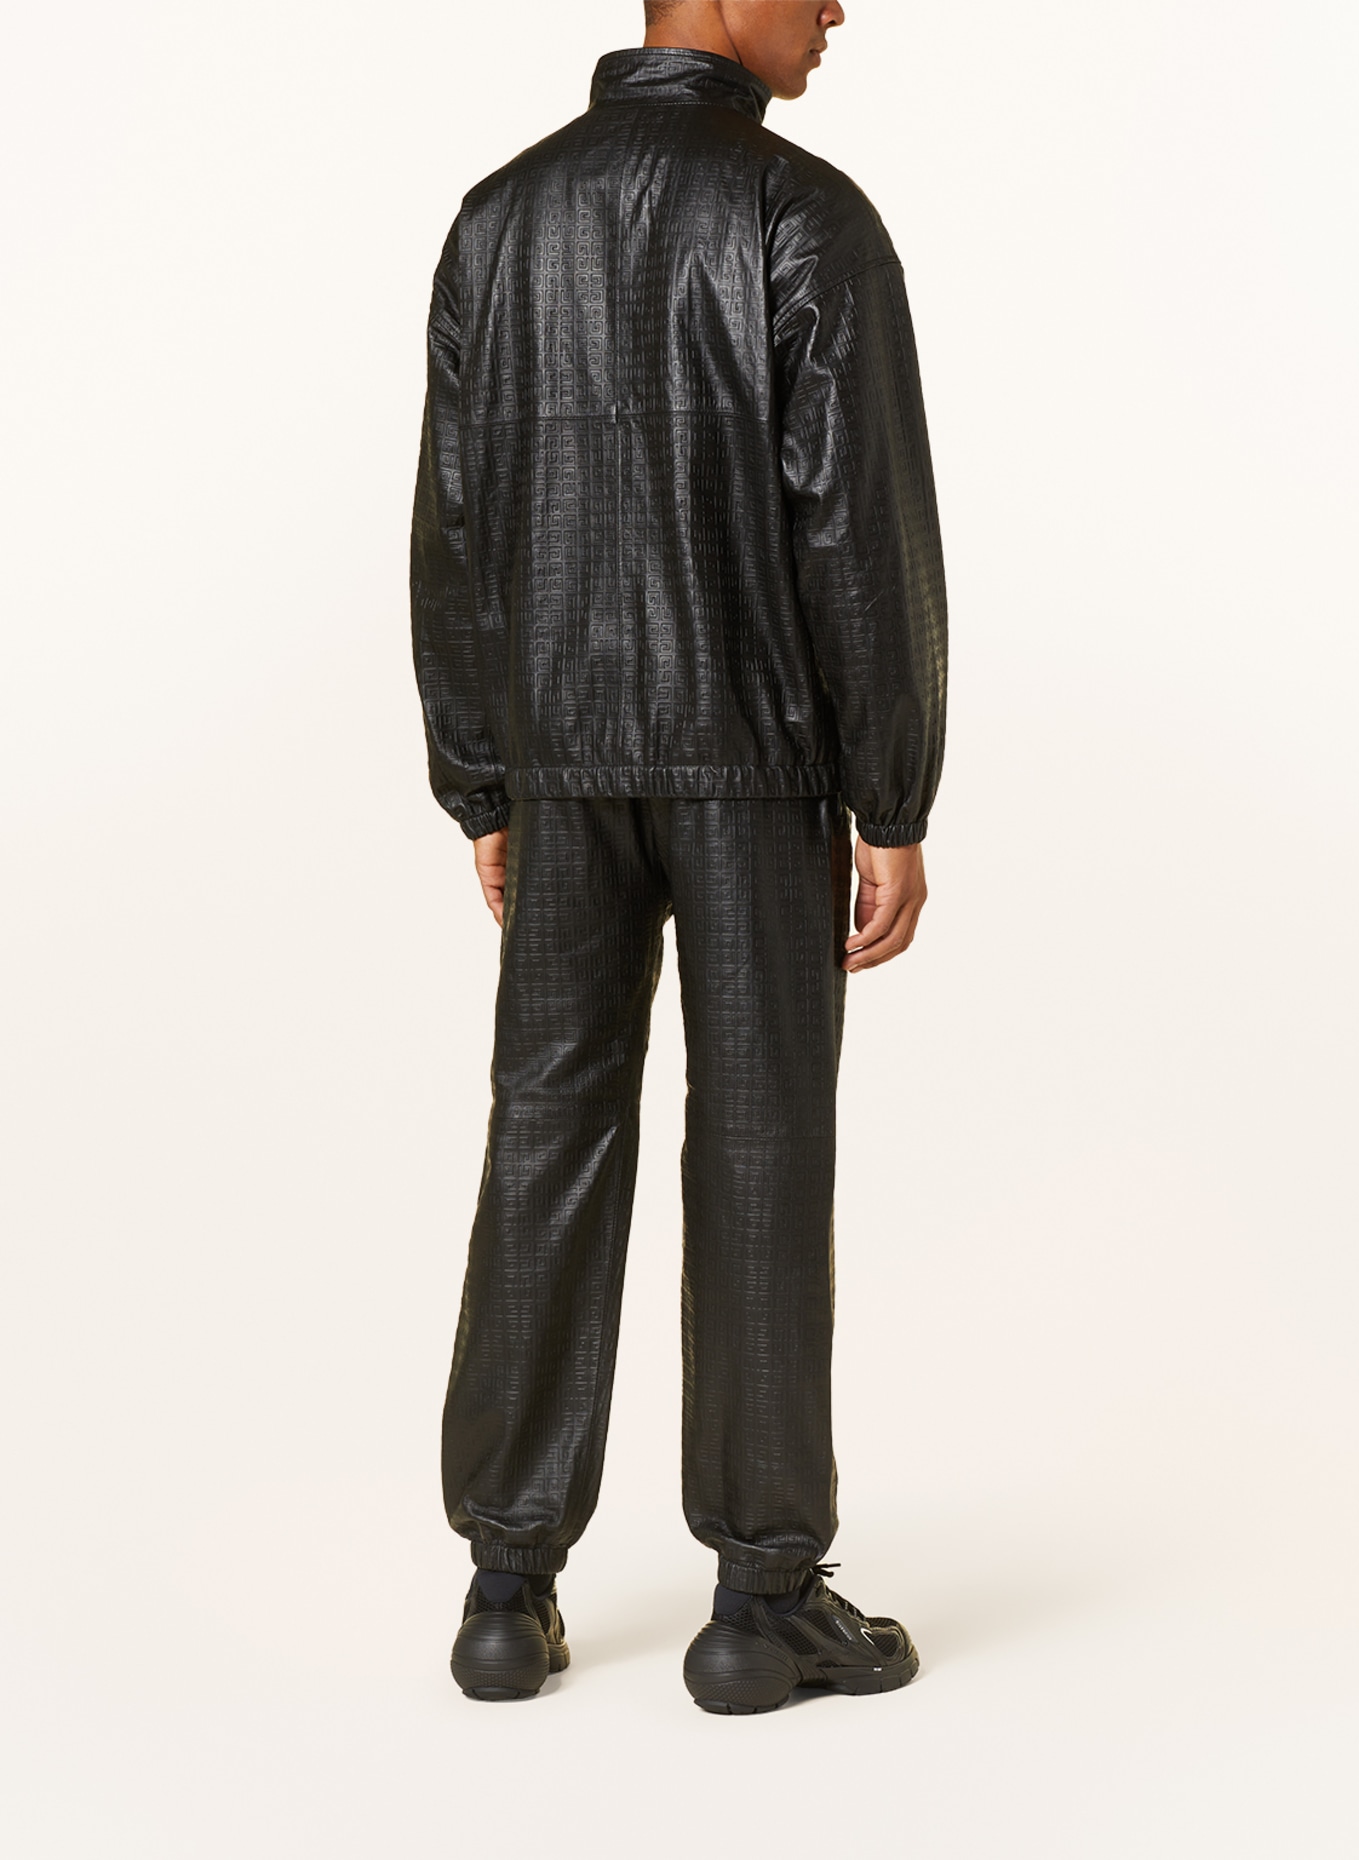 Givenchy Oversized Textured-leather Bomber Jacket in Black